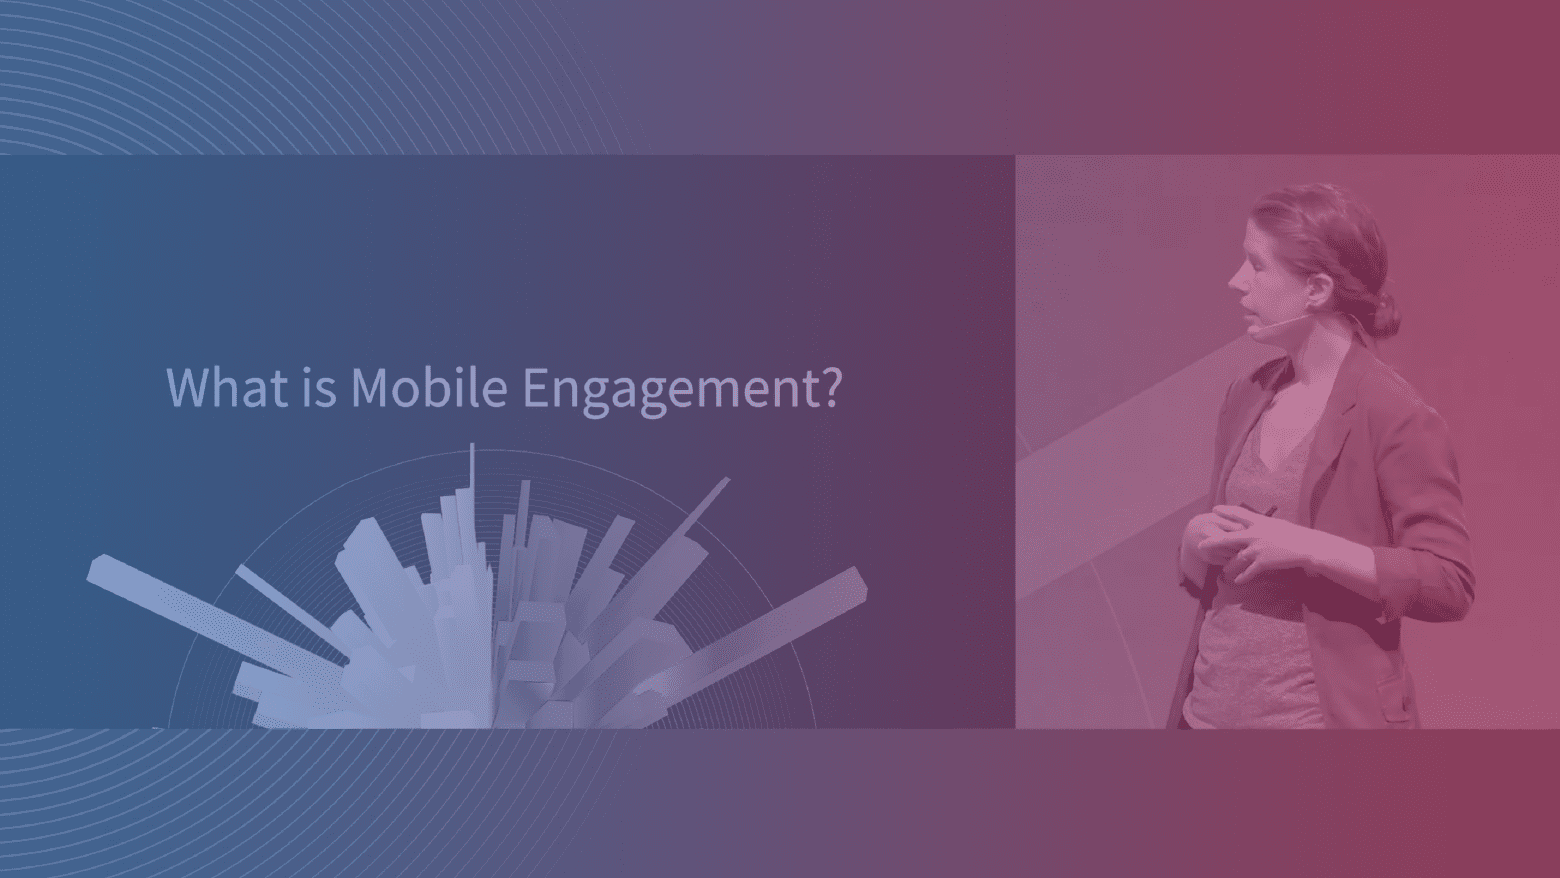 5 Easy(ish) Ways to Increase Mobile Engagement